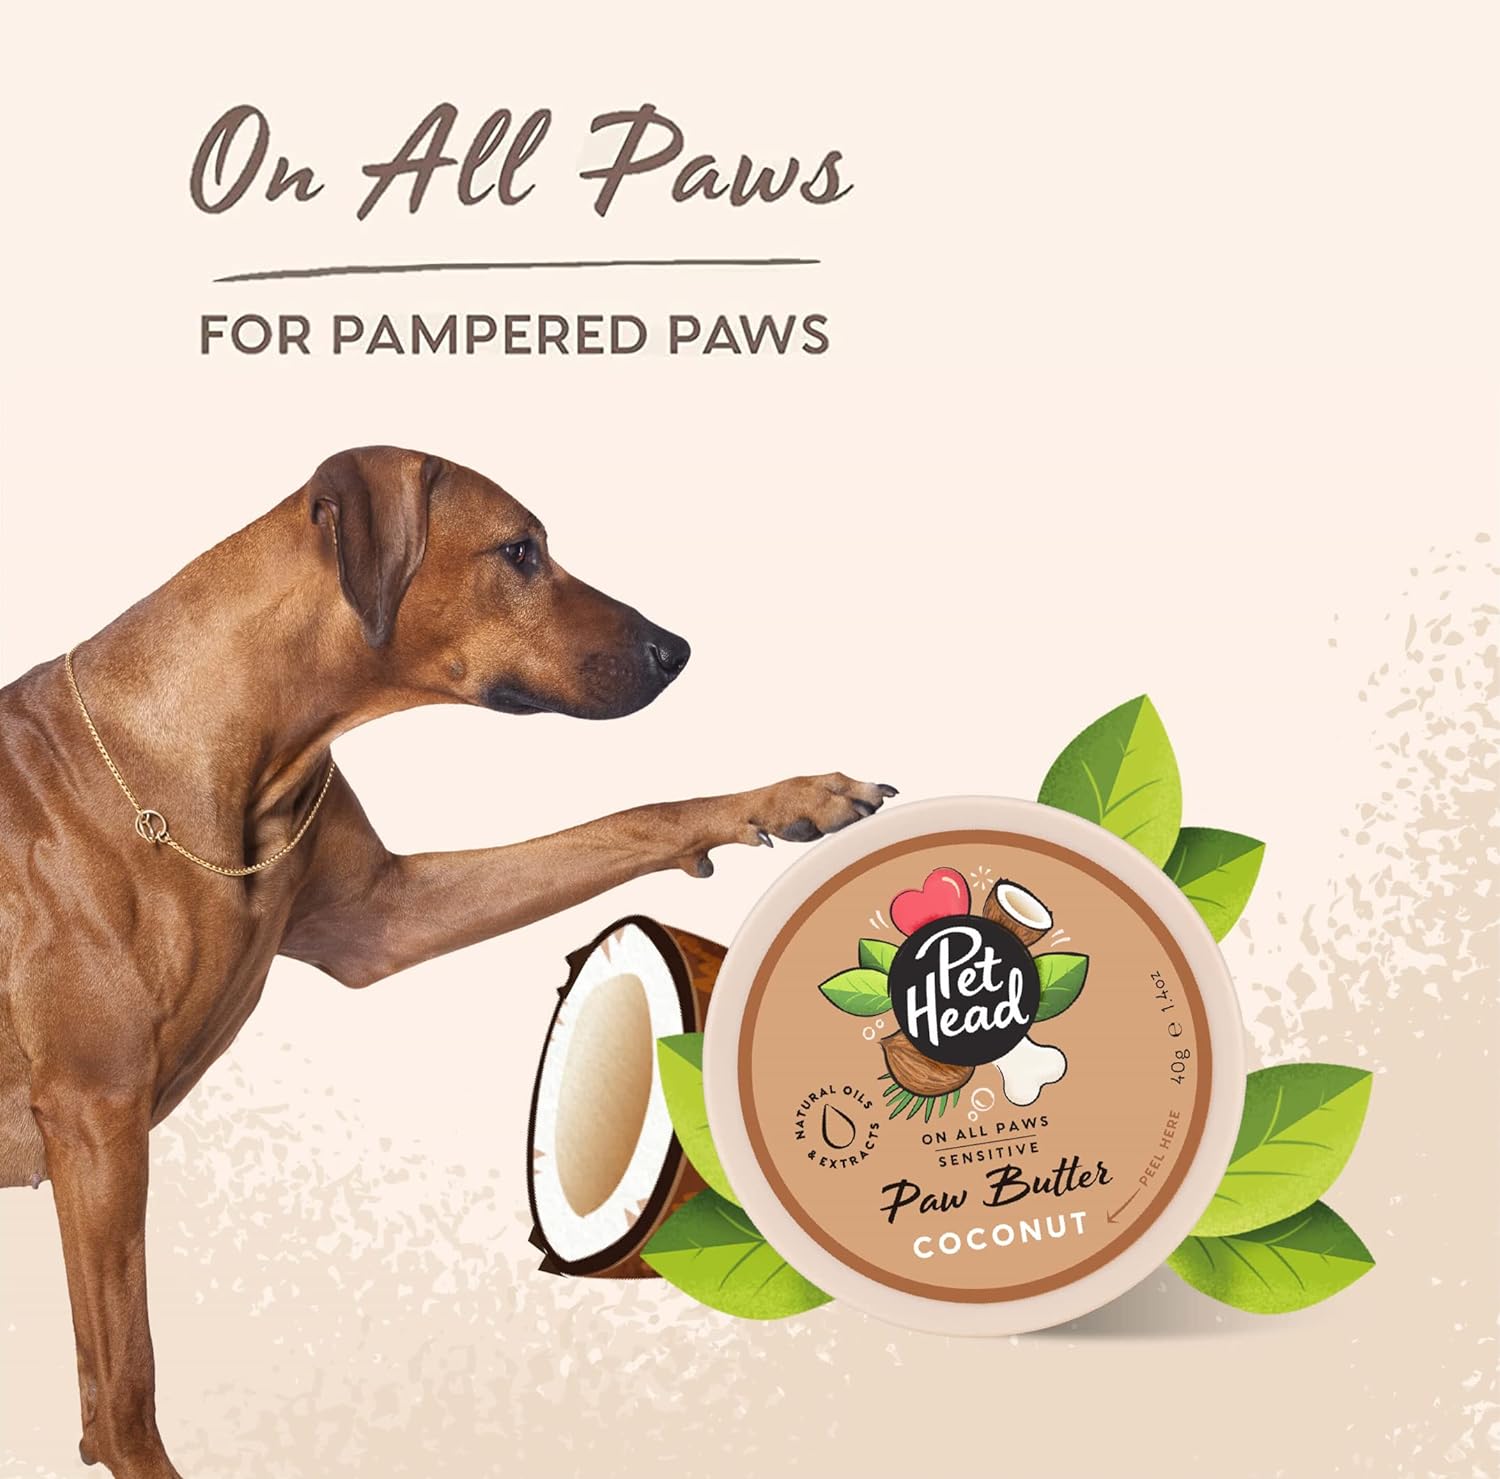 PET Head On All Paws Coconut Paw Butter 1.4 oz. Nourishing Paw Balm, Moisturizes Paws and Noses to Leave Them Soft and Crack-Free, Lickable, Gentle Formula for Puppies. Made in USA : Everything Else